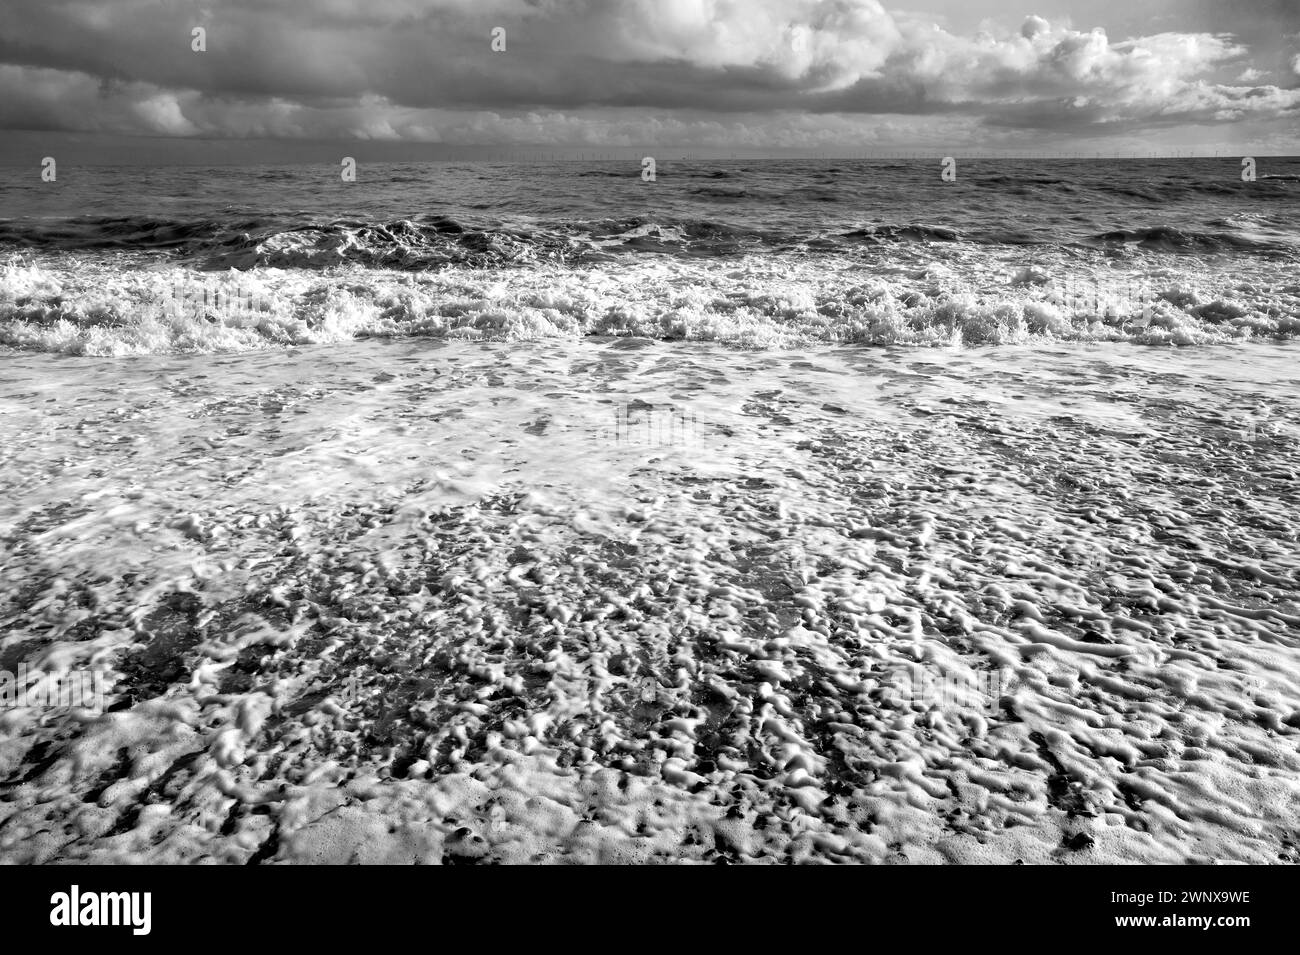 B&w strong sunlight of waves breaking on pebble beach surf, spume & spray, green sea, a blue sky with billowing white clouds South Coast England Stock Photo